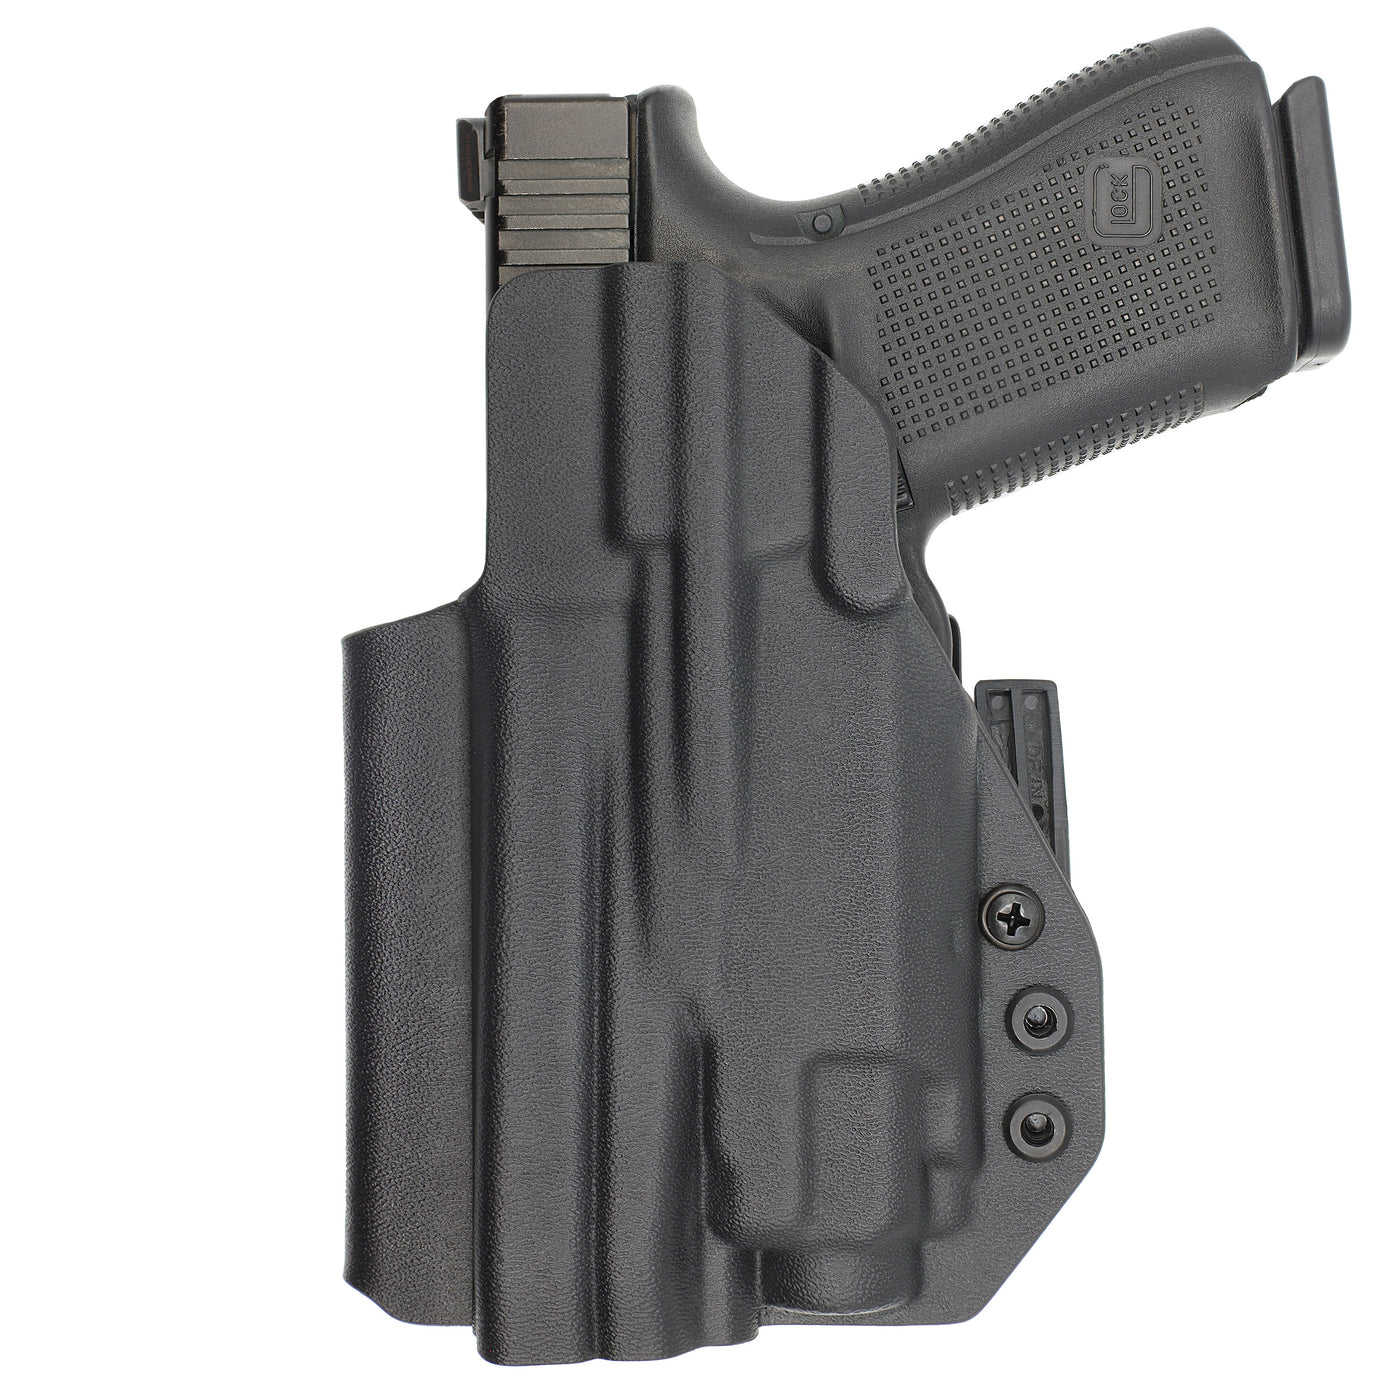 C&G Holsters custom IWB ALPHA UPGRADE Tactical Glock 20/21 streamlight TLR8 holstered back view